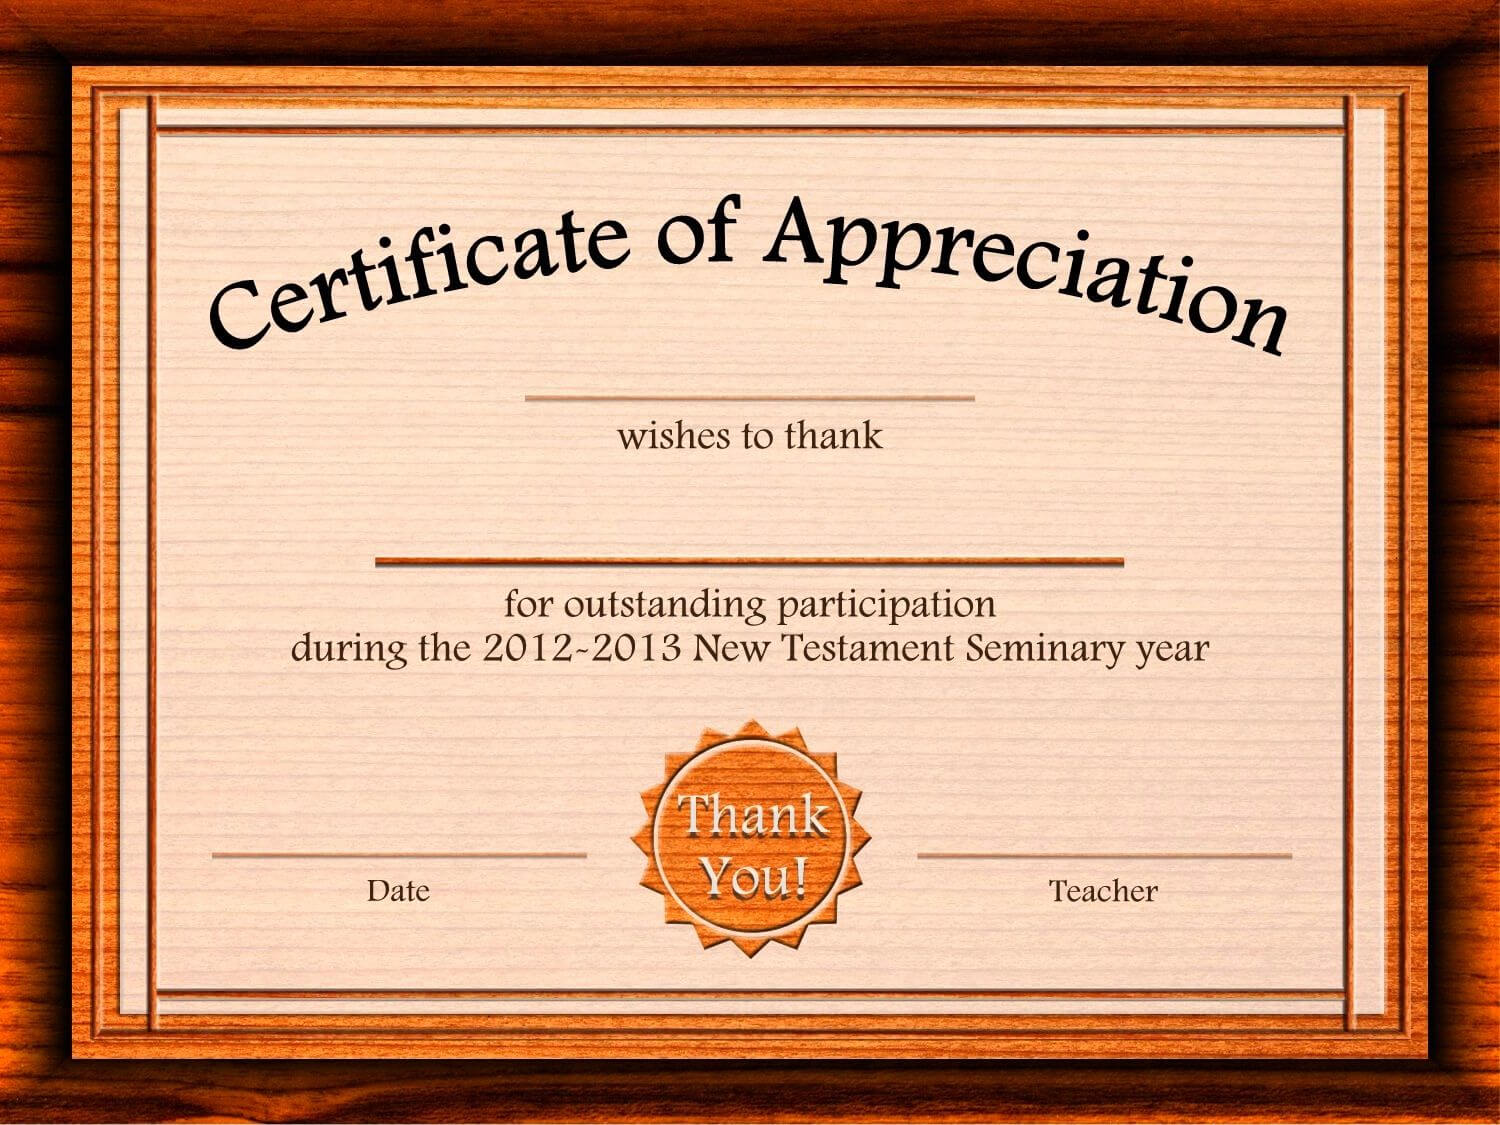 appreciation certificate template word - Cicim Intended For Certificate Of Participation Word Template